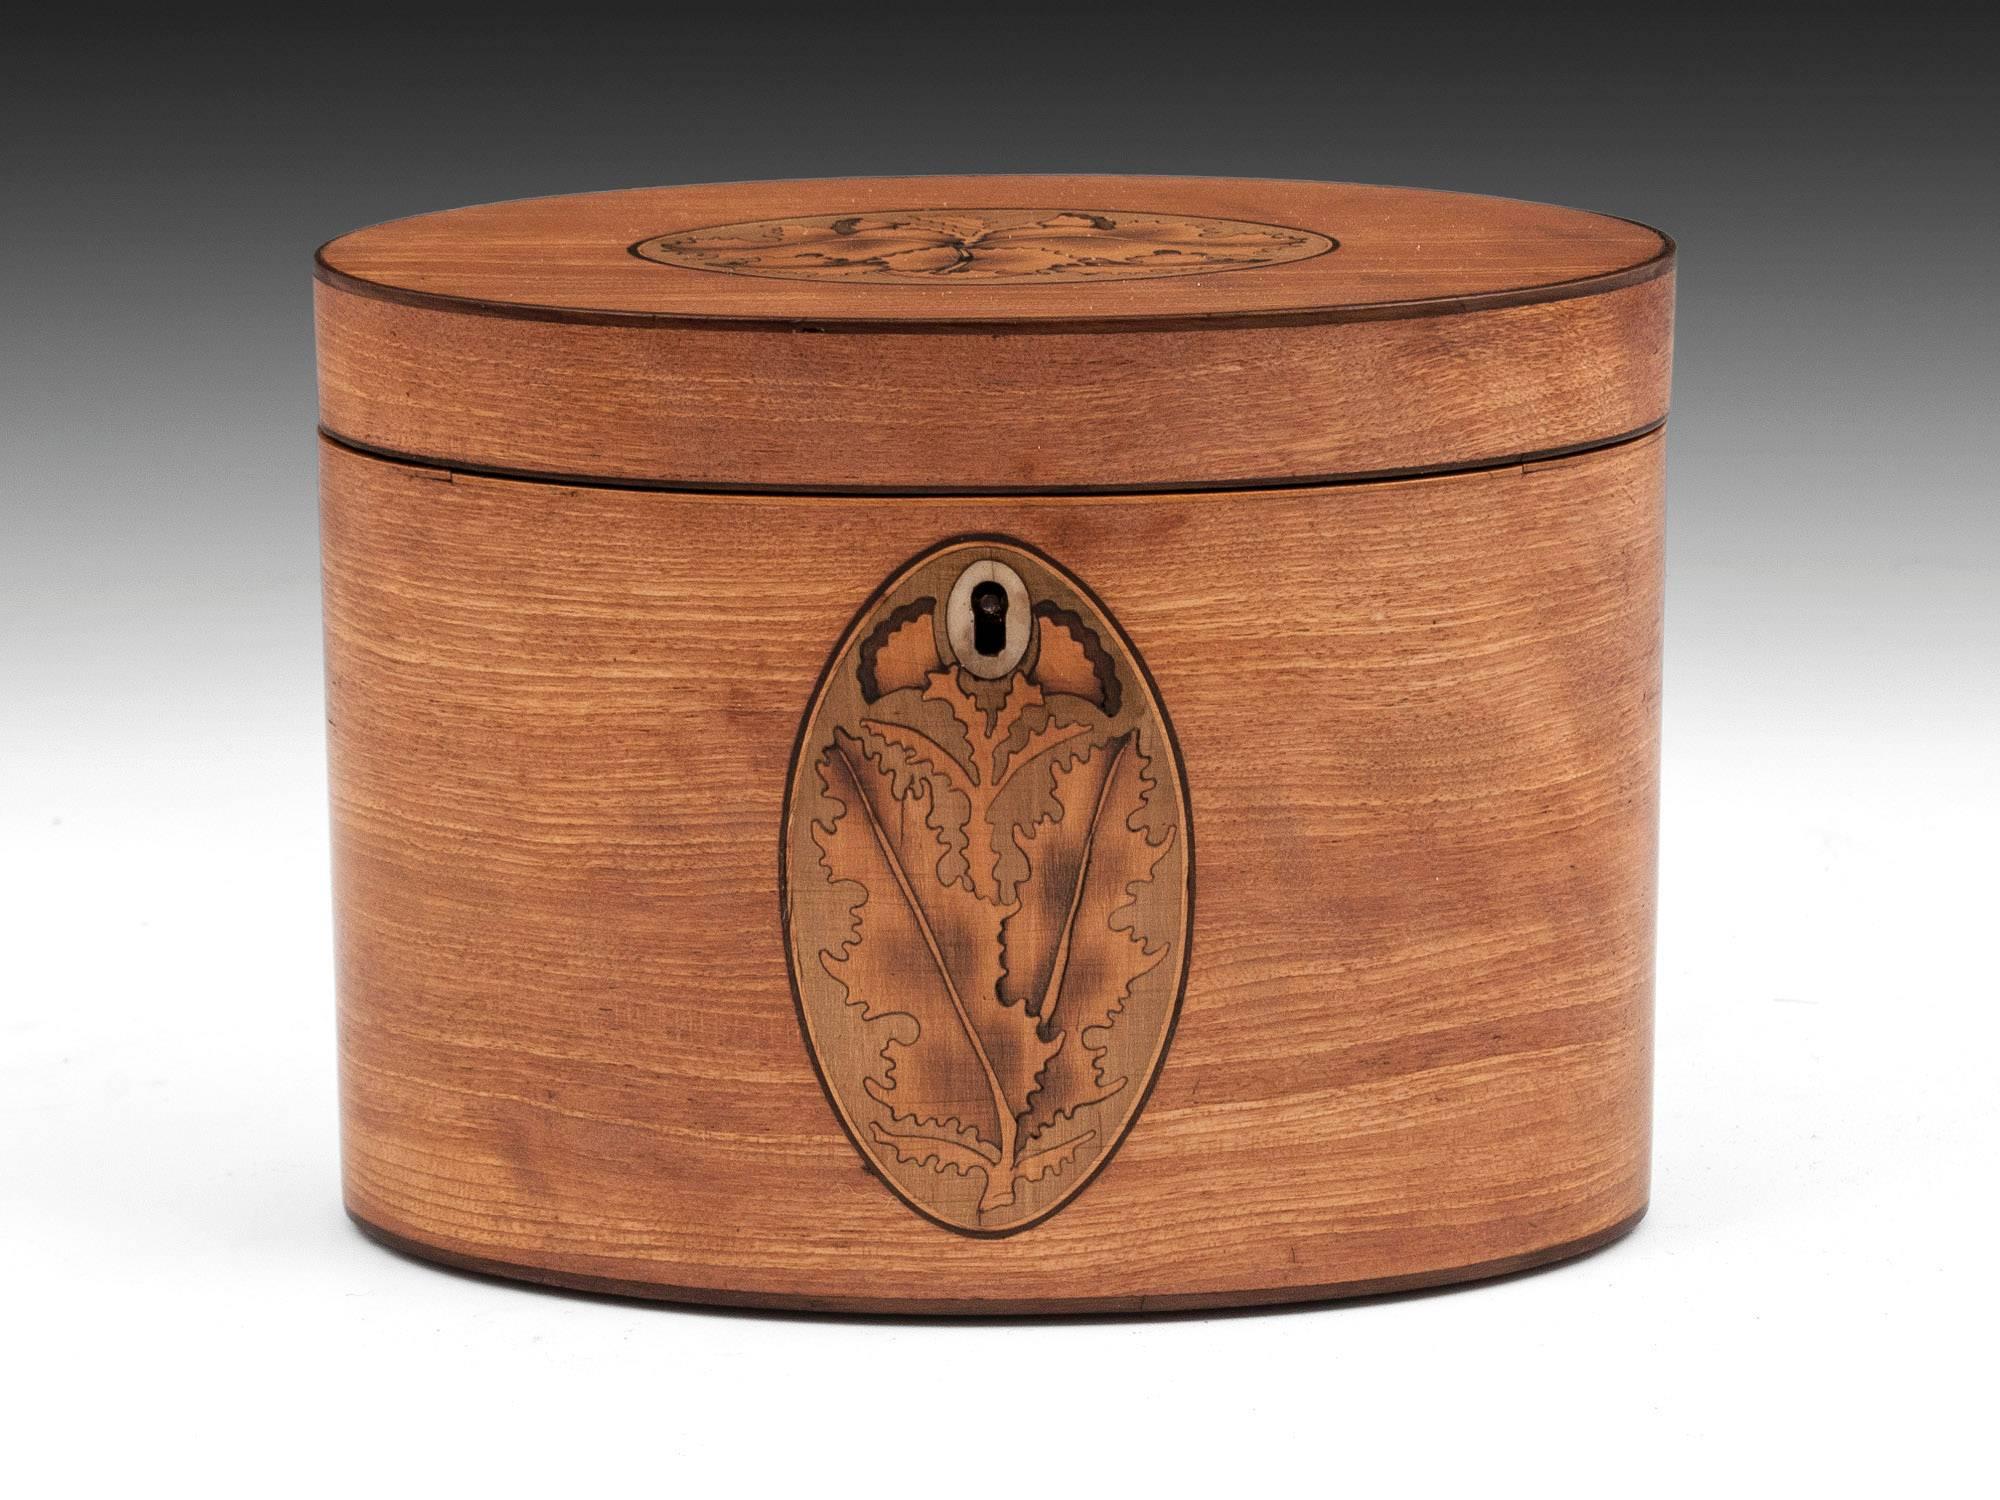 Antique oval tea caddy beautifully veneered in Indian Satinwood with two exquisite oak leaf inlays to the top & front. The delicate oval key profile is made from bone. 

The interior of this satinwood oval tea caddy features a bone handled